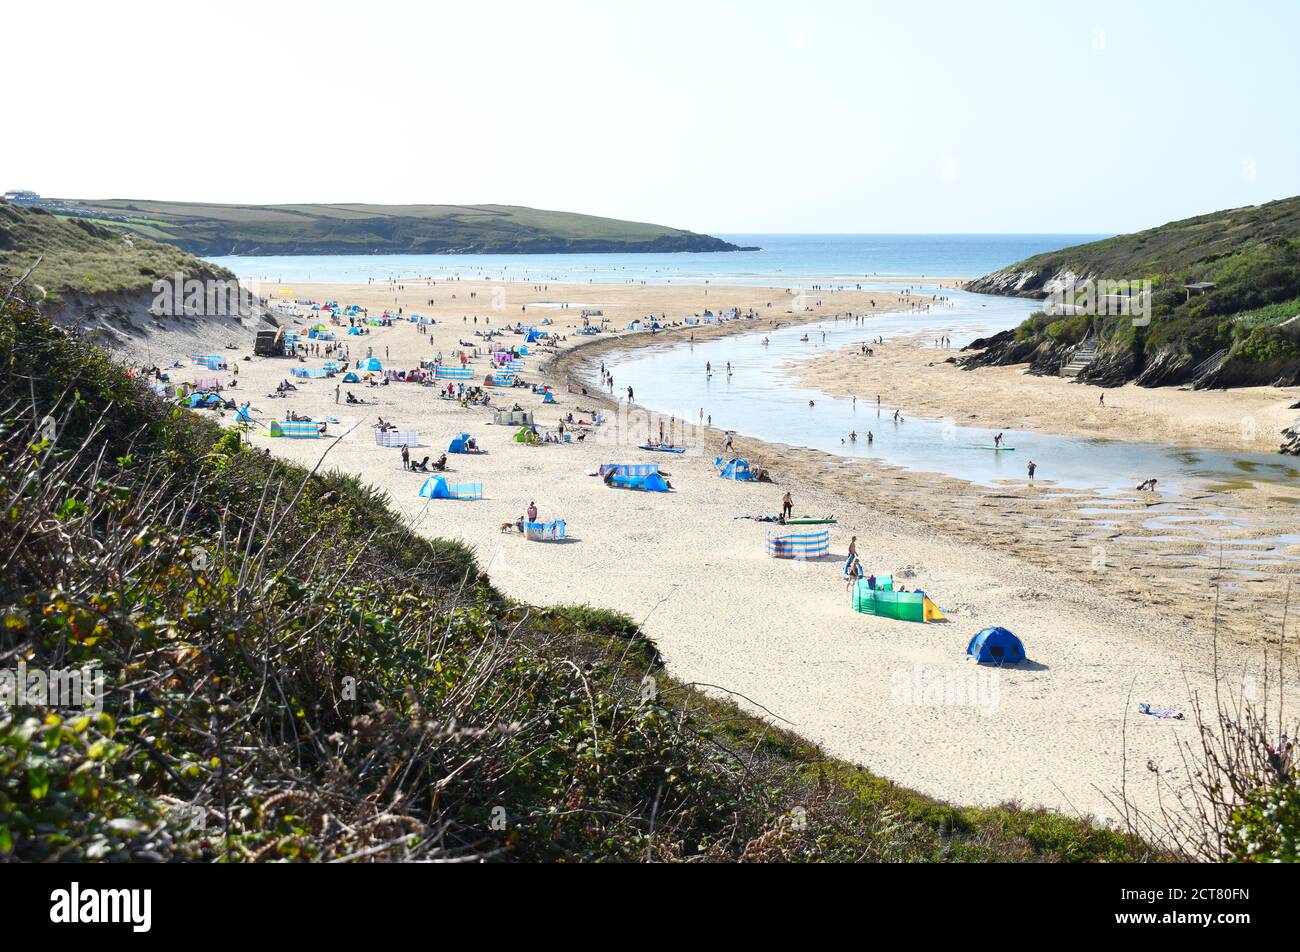 Gannel Estuary, Newquay, Cornwall, UK - September 17 2020: At Crantock beach people are enjoying the sandy beach next to the river Gannel in the sun. Stock Photo